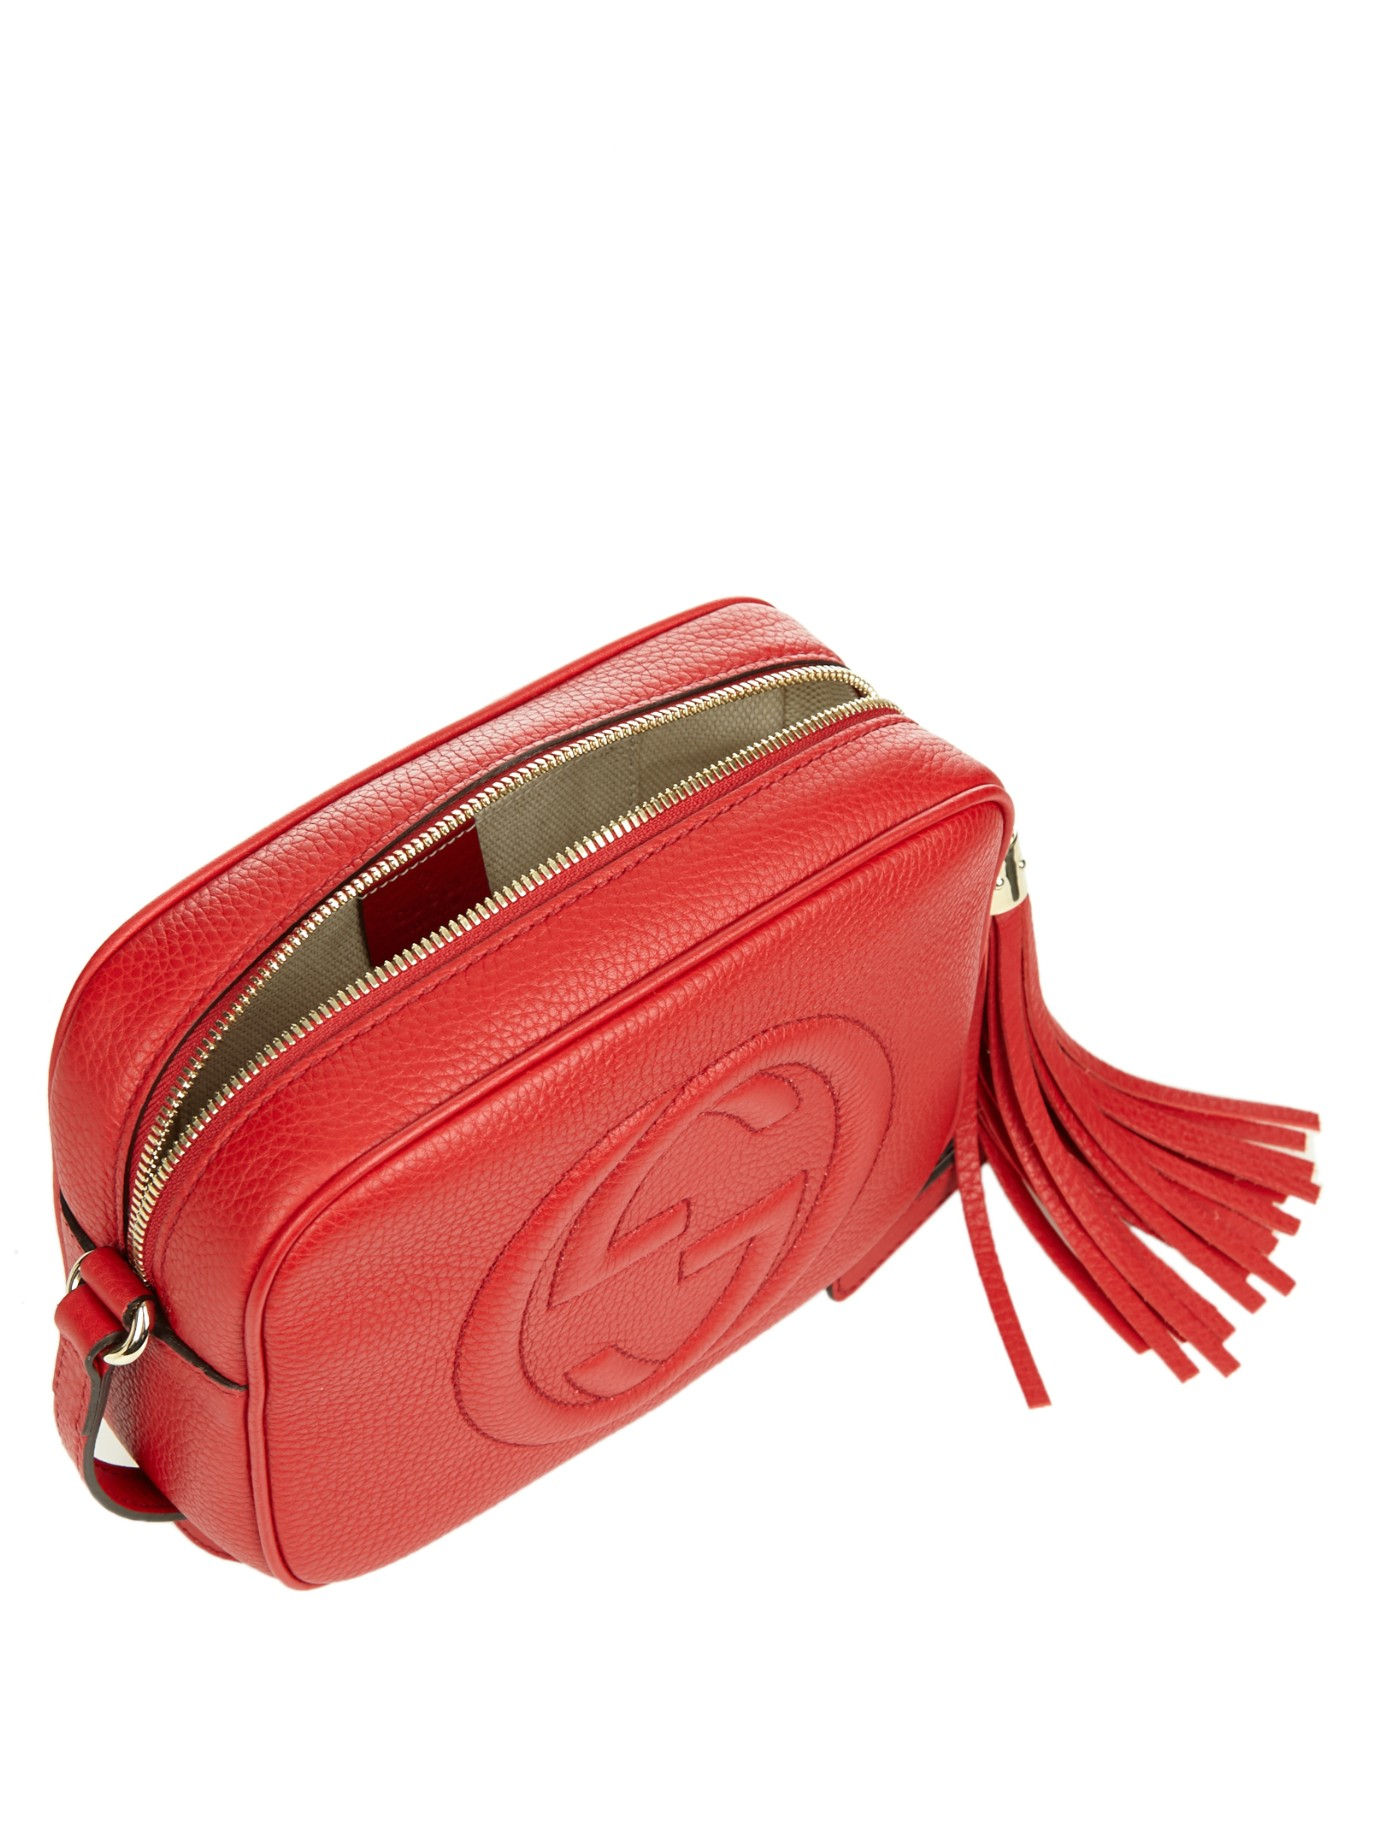 Lyst - Gucci Soho Grained-Leather Cross-Body Bag in Red